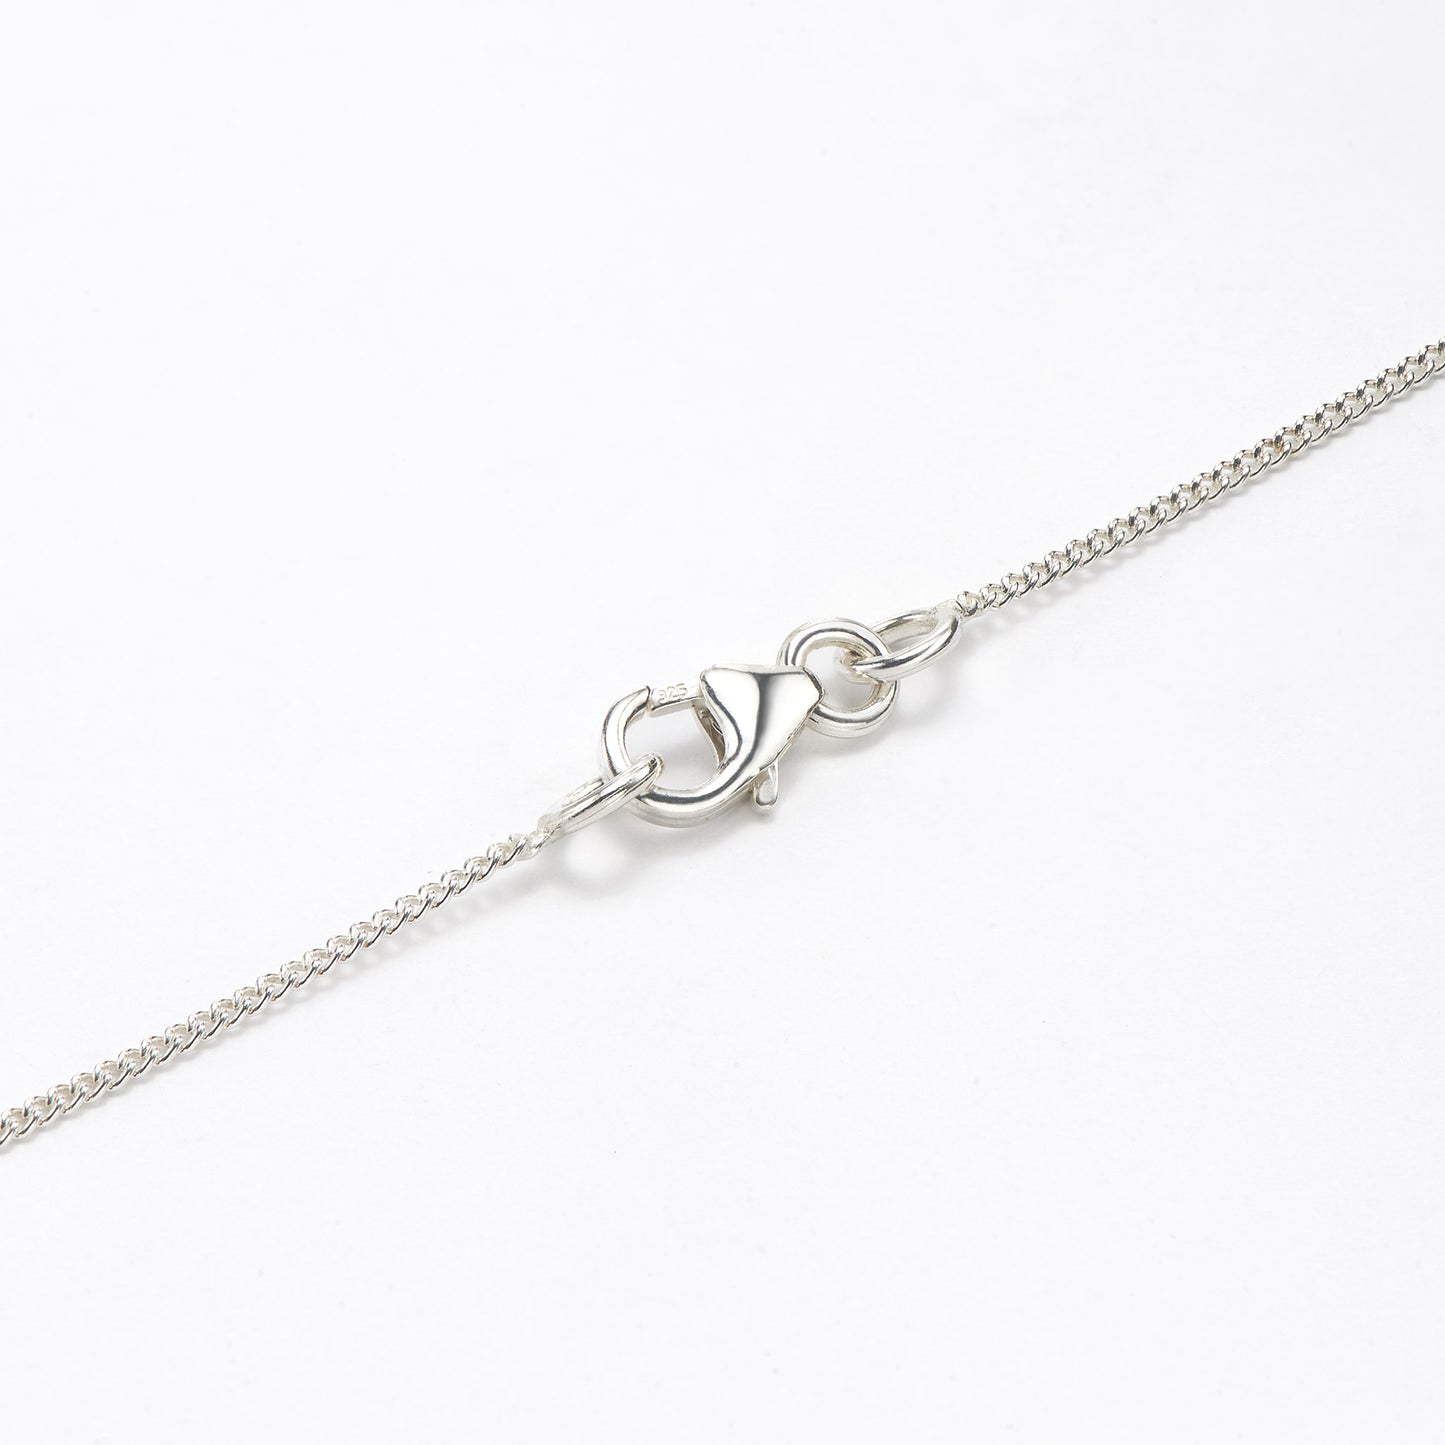 sterling silver 925 necklace clasp showing fine 0.6mm chain